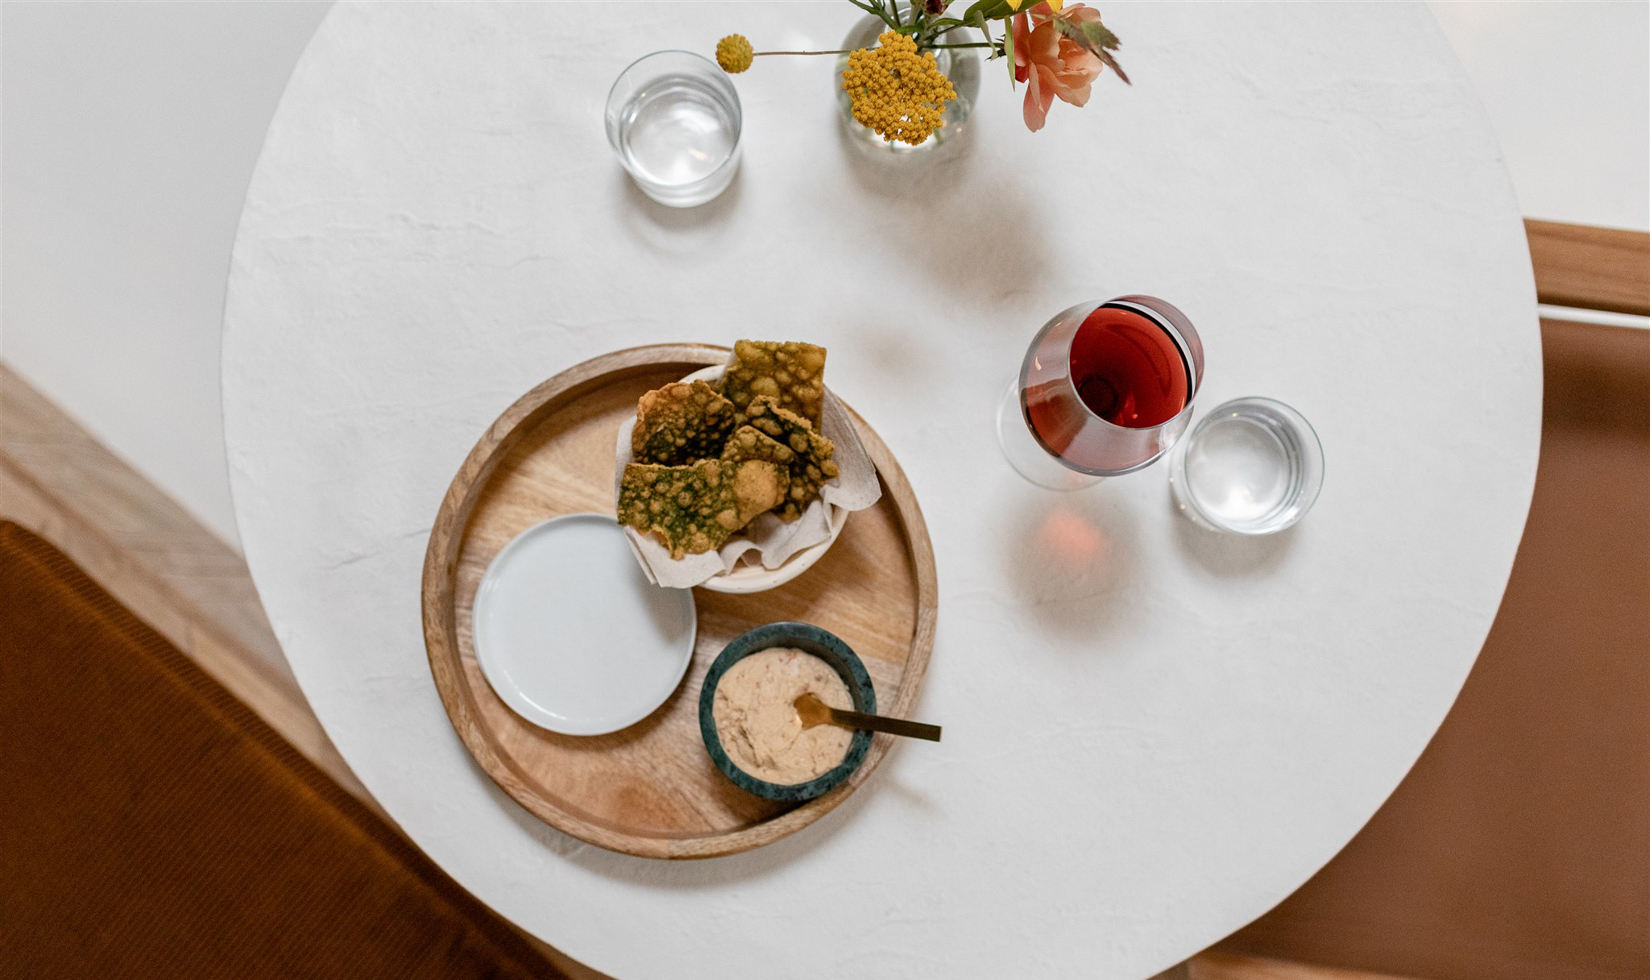 overhead view of white table with red wine glass and food